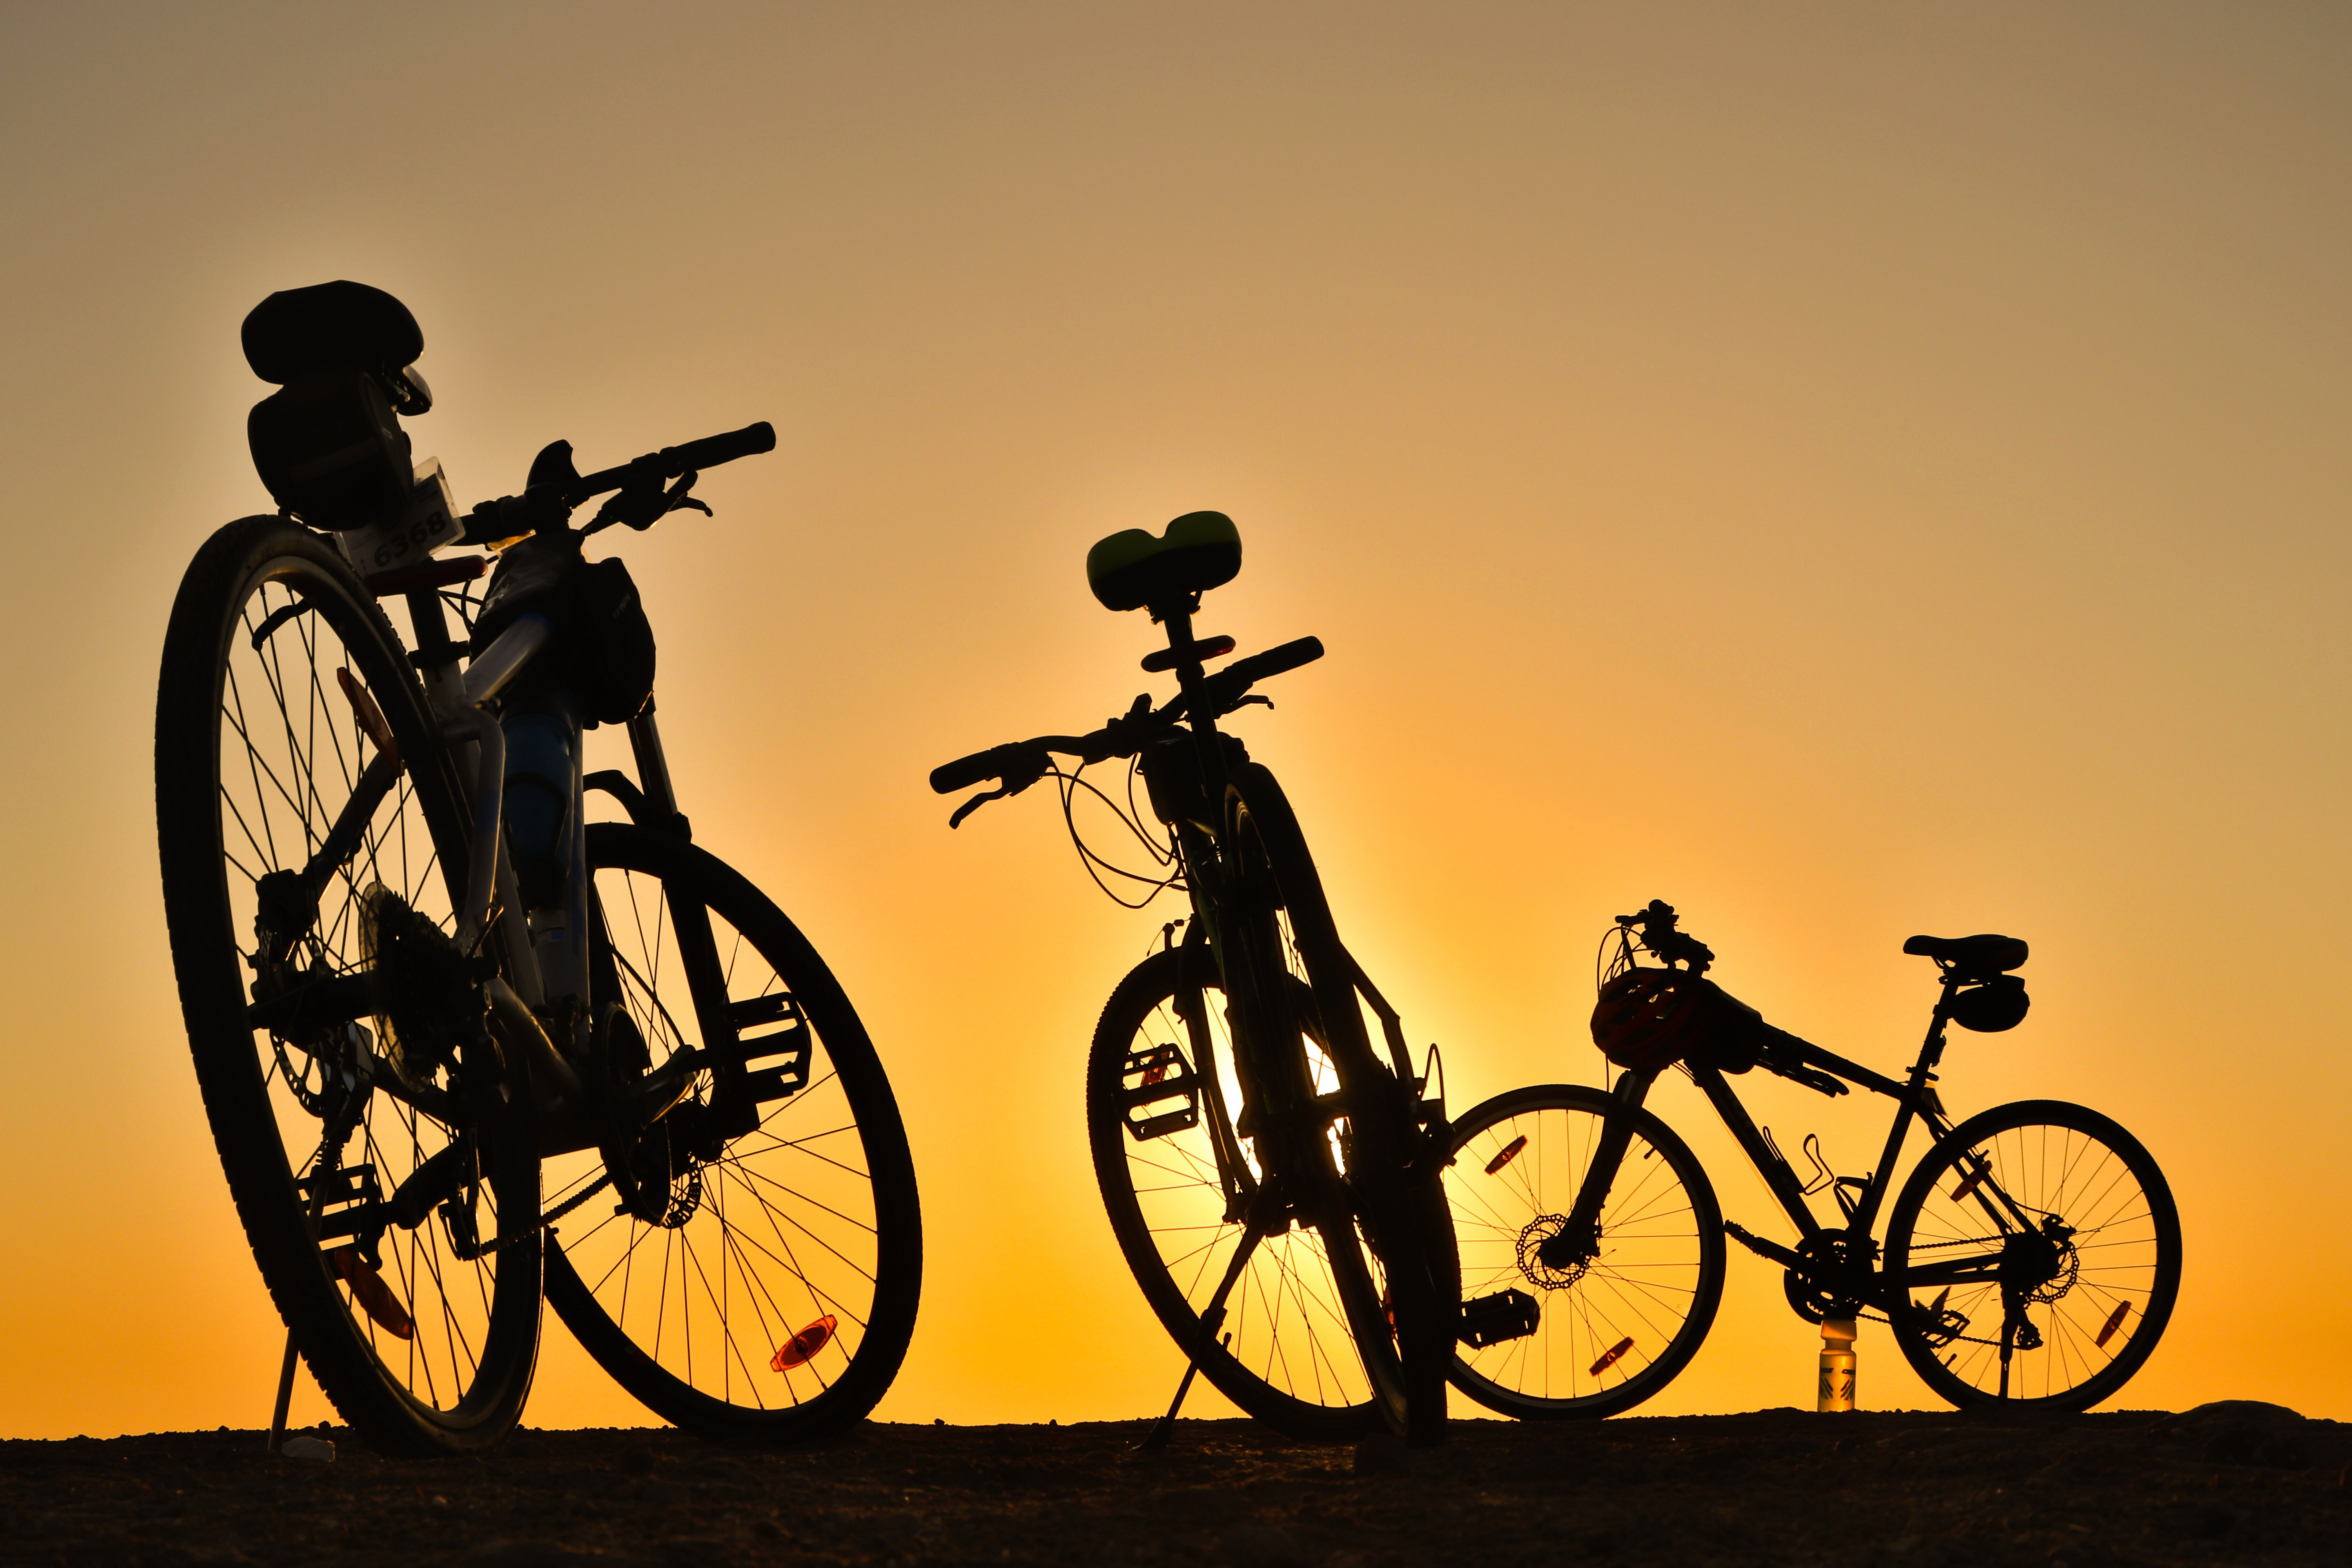 Bicycles in the sunset image - Free stock photo - Public Domain photo - CC0 Images